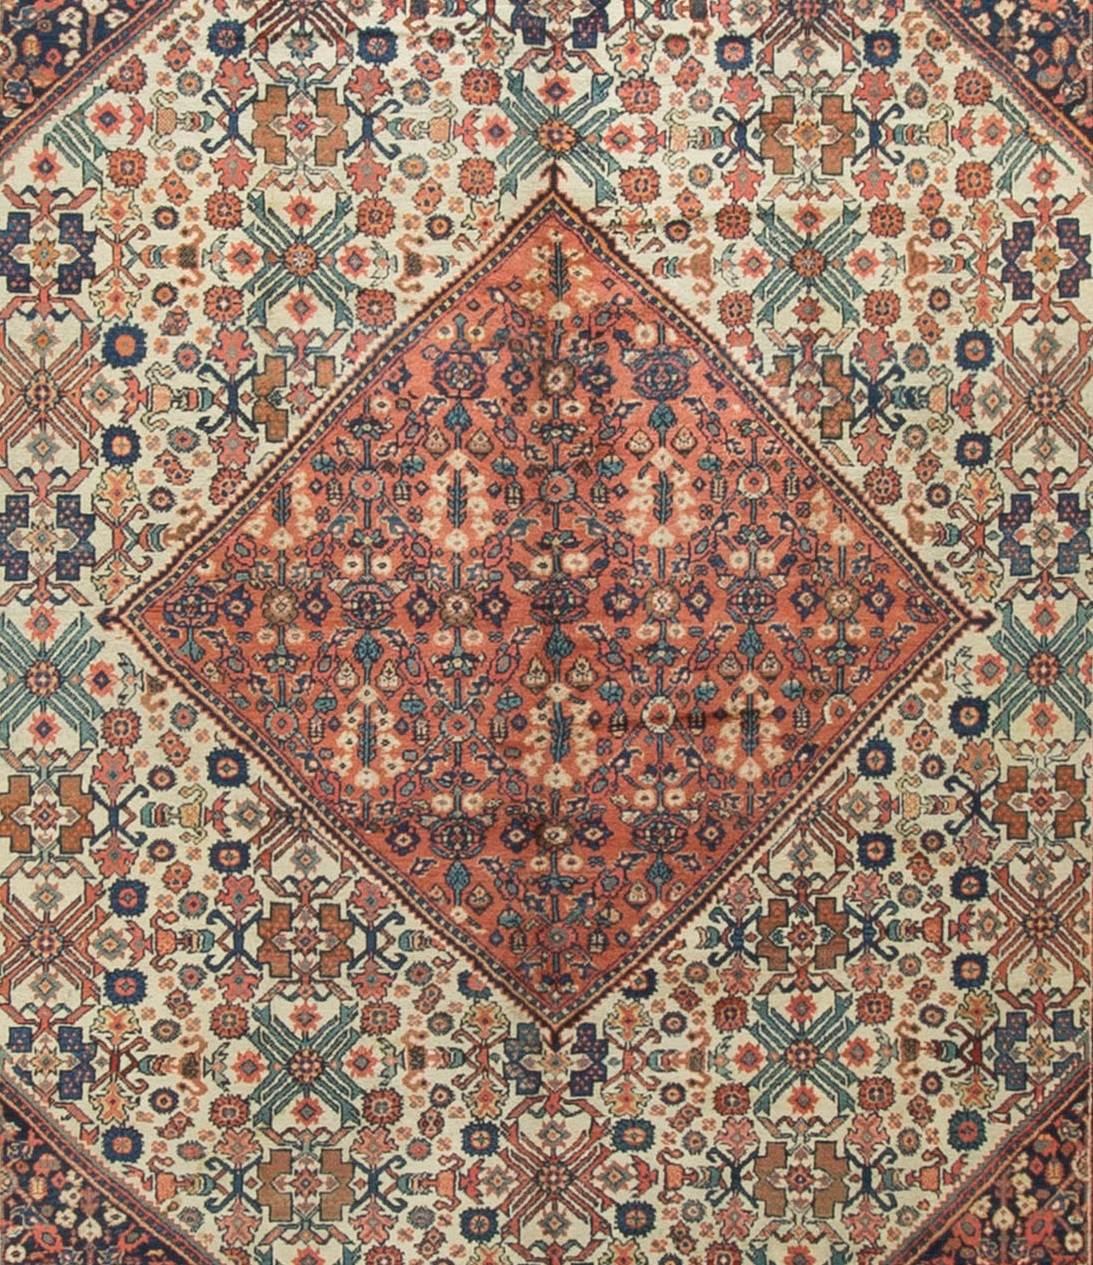 Antique Persian Sultanabad rug, circa 1890. Lovely soft ivory ground filled with flower elements surrounding a central motif. Size: 9'1 x 12'1.